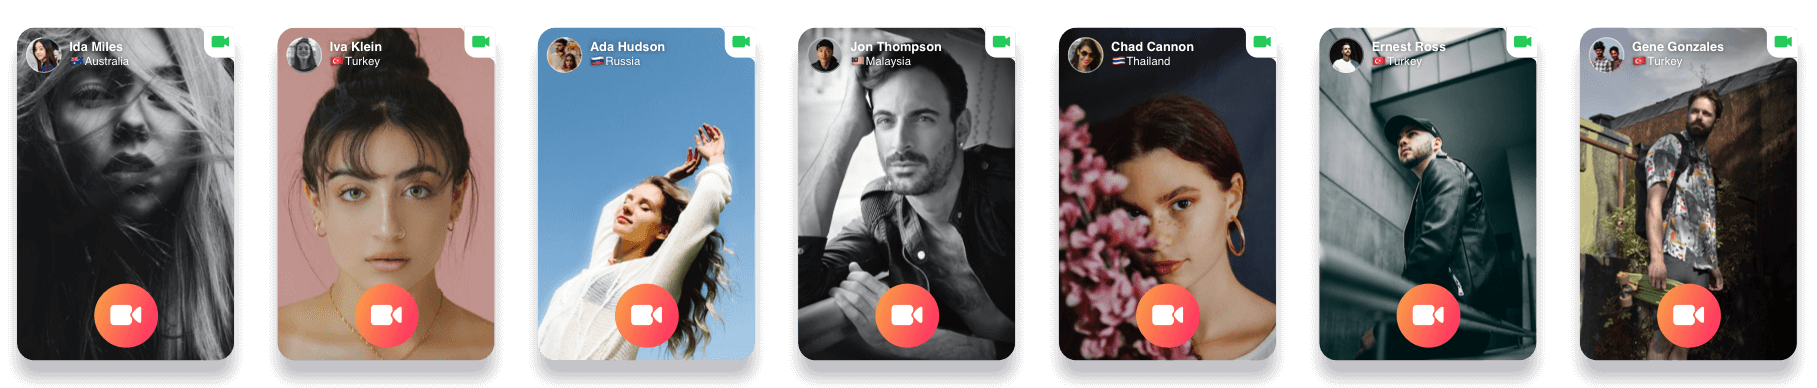 Video chat with your favourite user on LivCam.